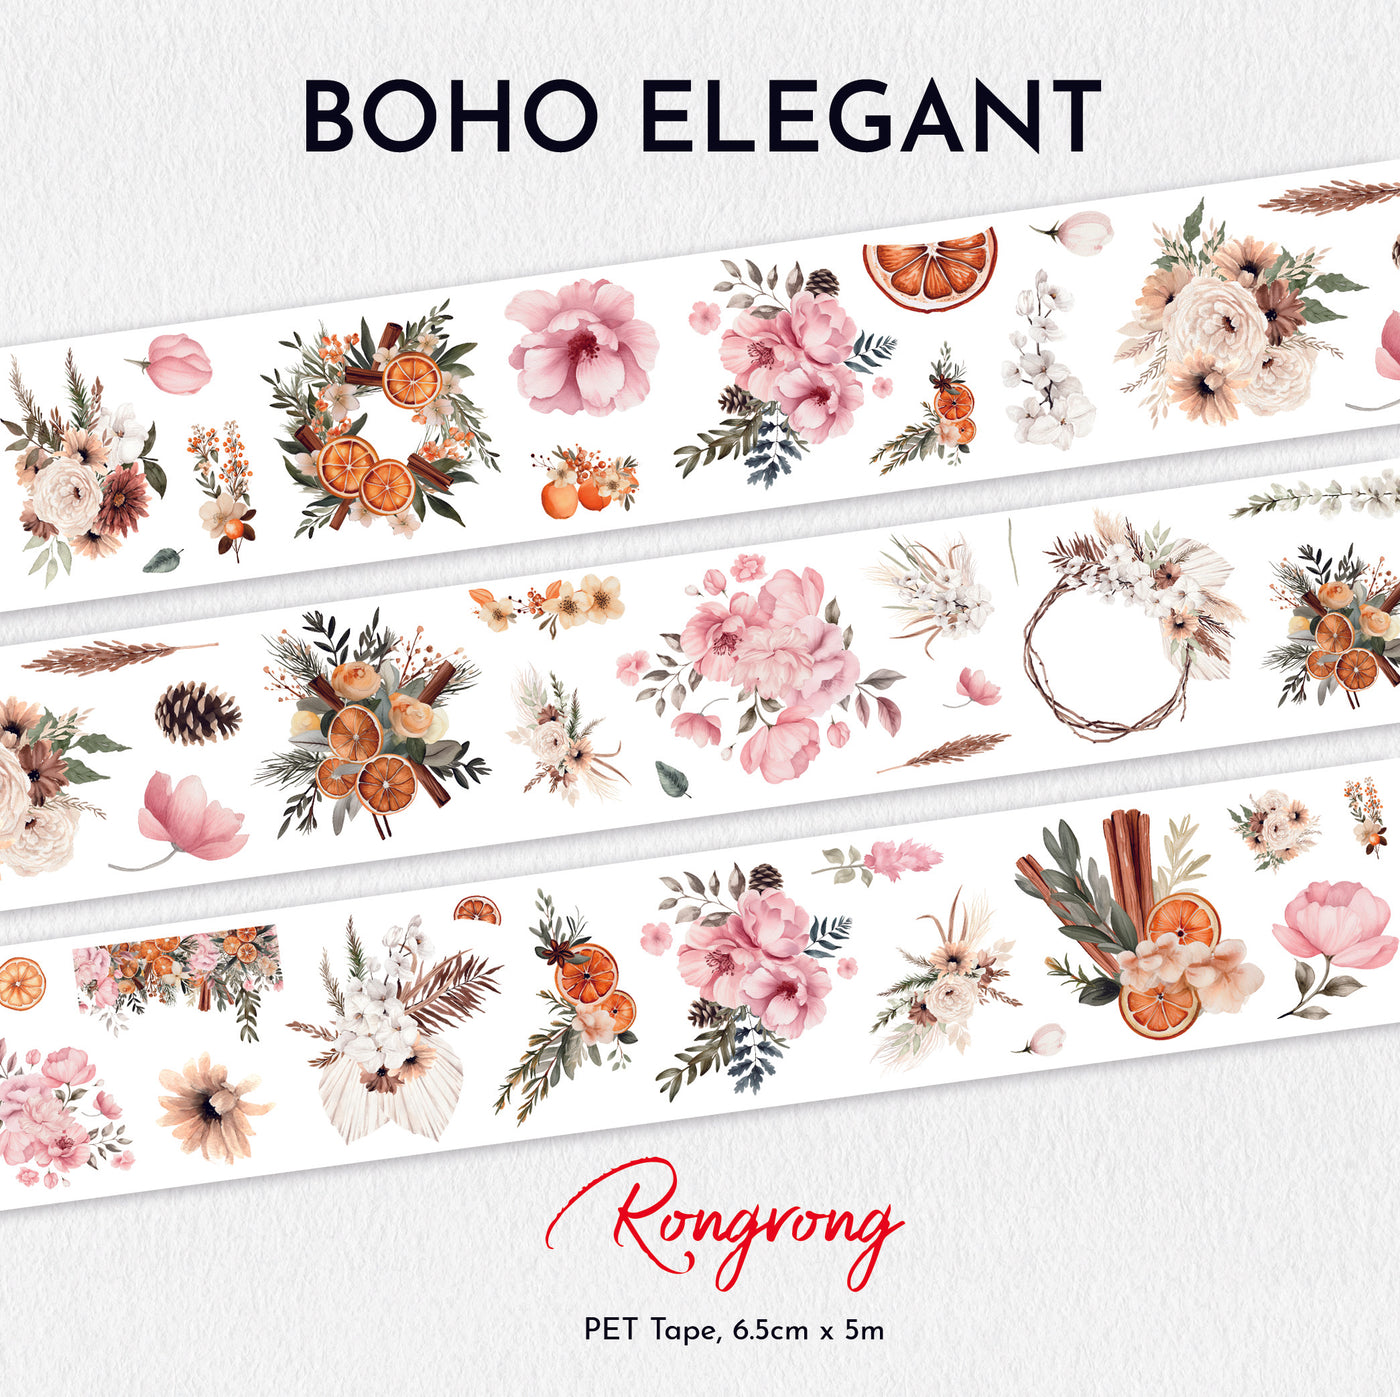 Shop Rongrong Boho Elegant PET Tape for Planners